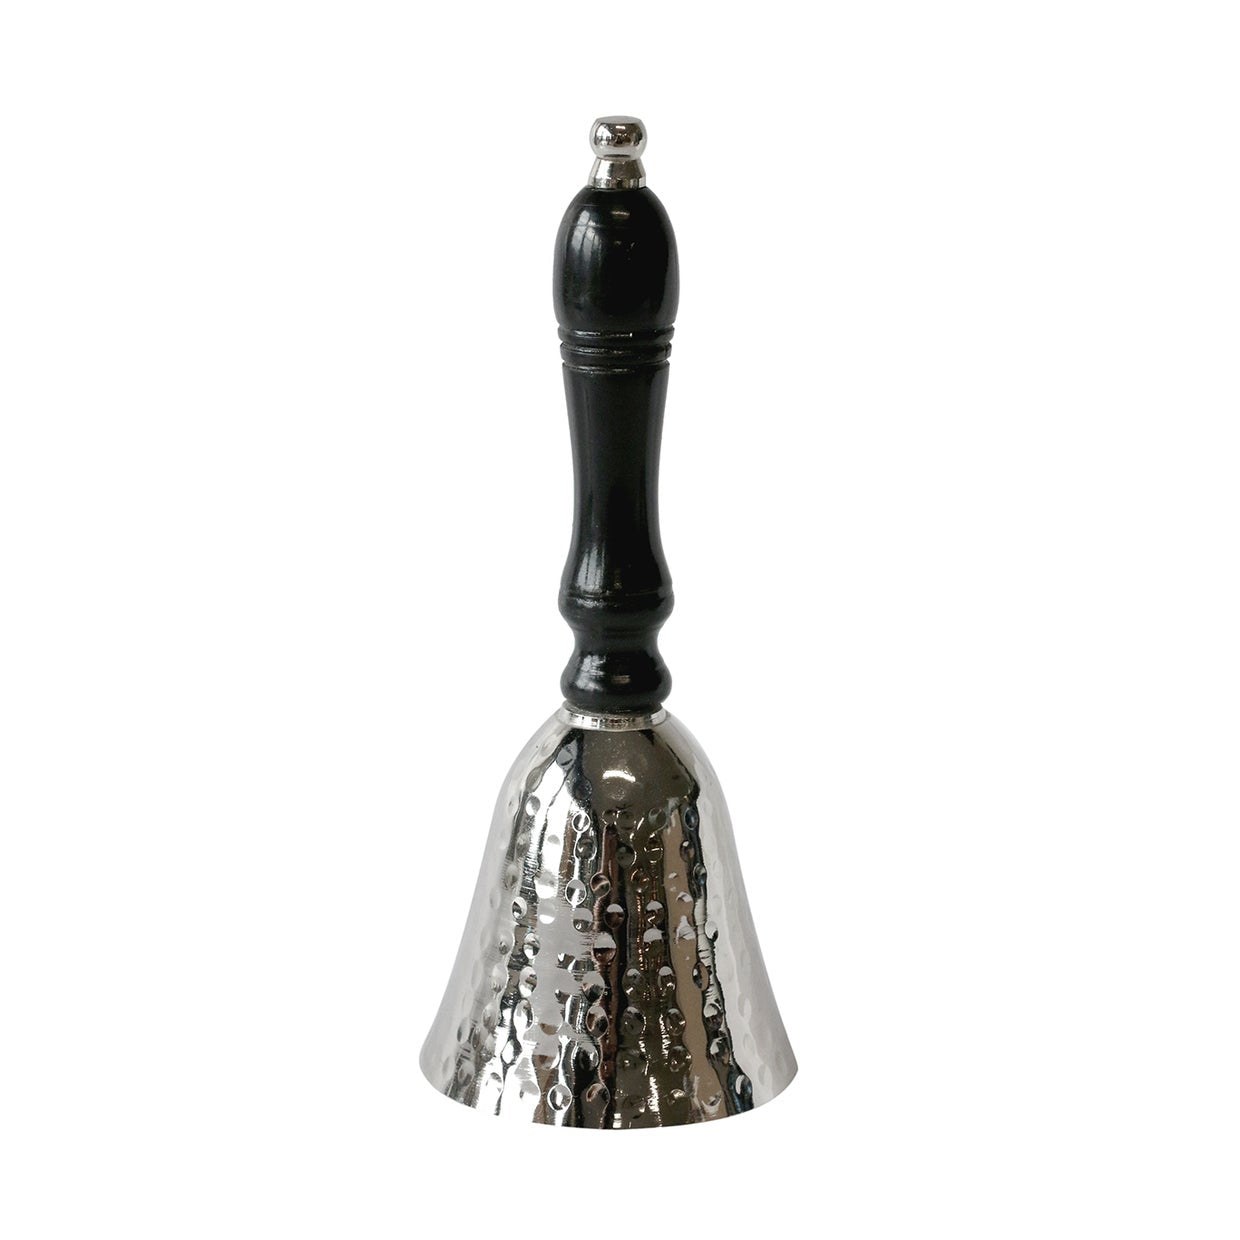 CC INTERIORS BELL IN NICKEL FINISH W BLACK WOODEN HANDLE